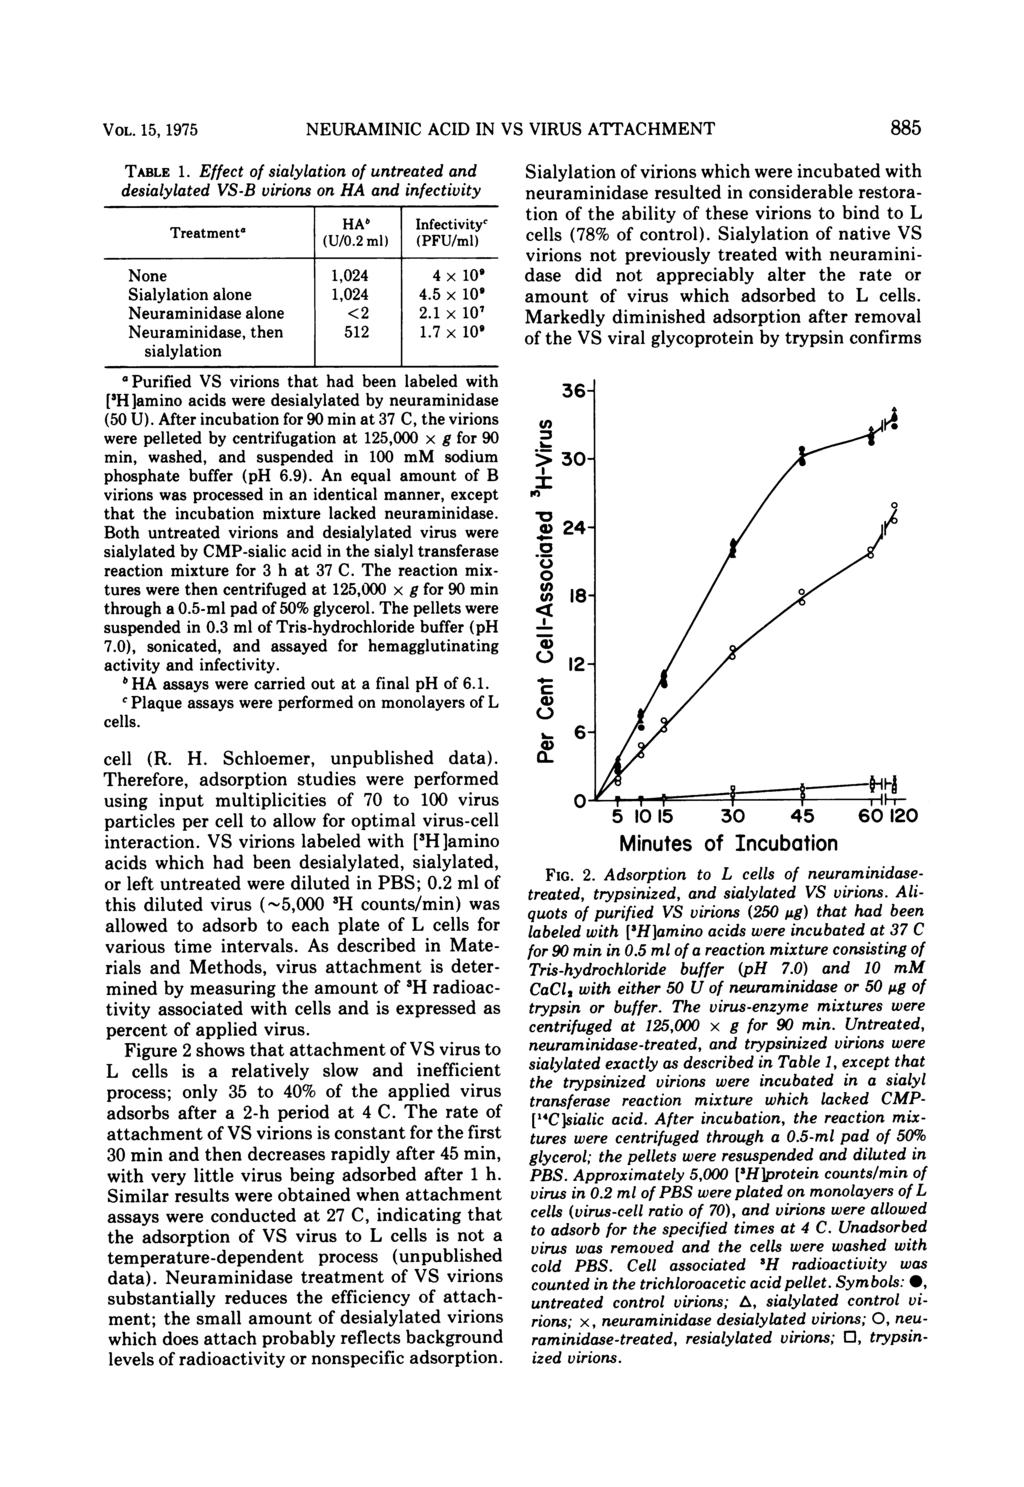 VOL. 15, 1975 TABLE 1. Effect of sialylation of untreated and desialylated VS-B virions on HA and infectivity NEURAMINIC ACID IN VS VIRUS ATTACHMENT Infectivityc Treatmenta HA, (UIO.